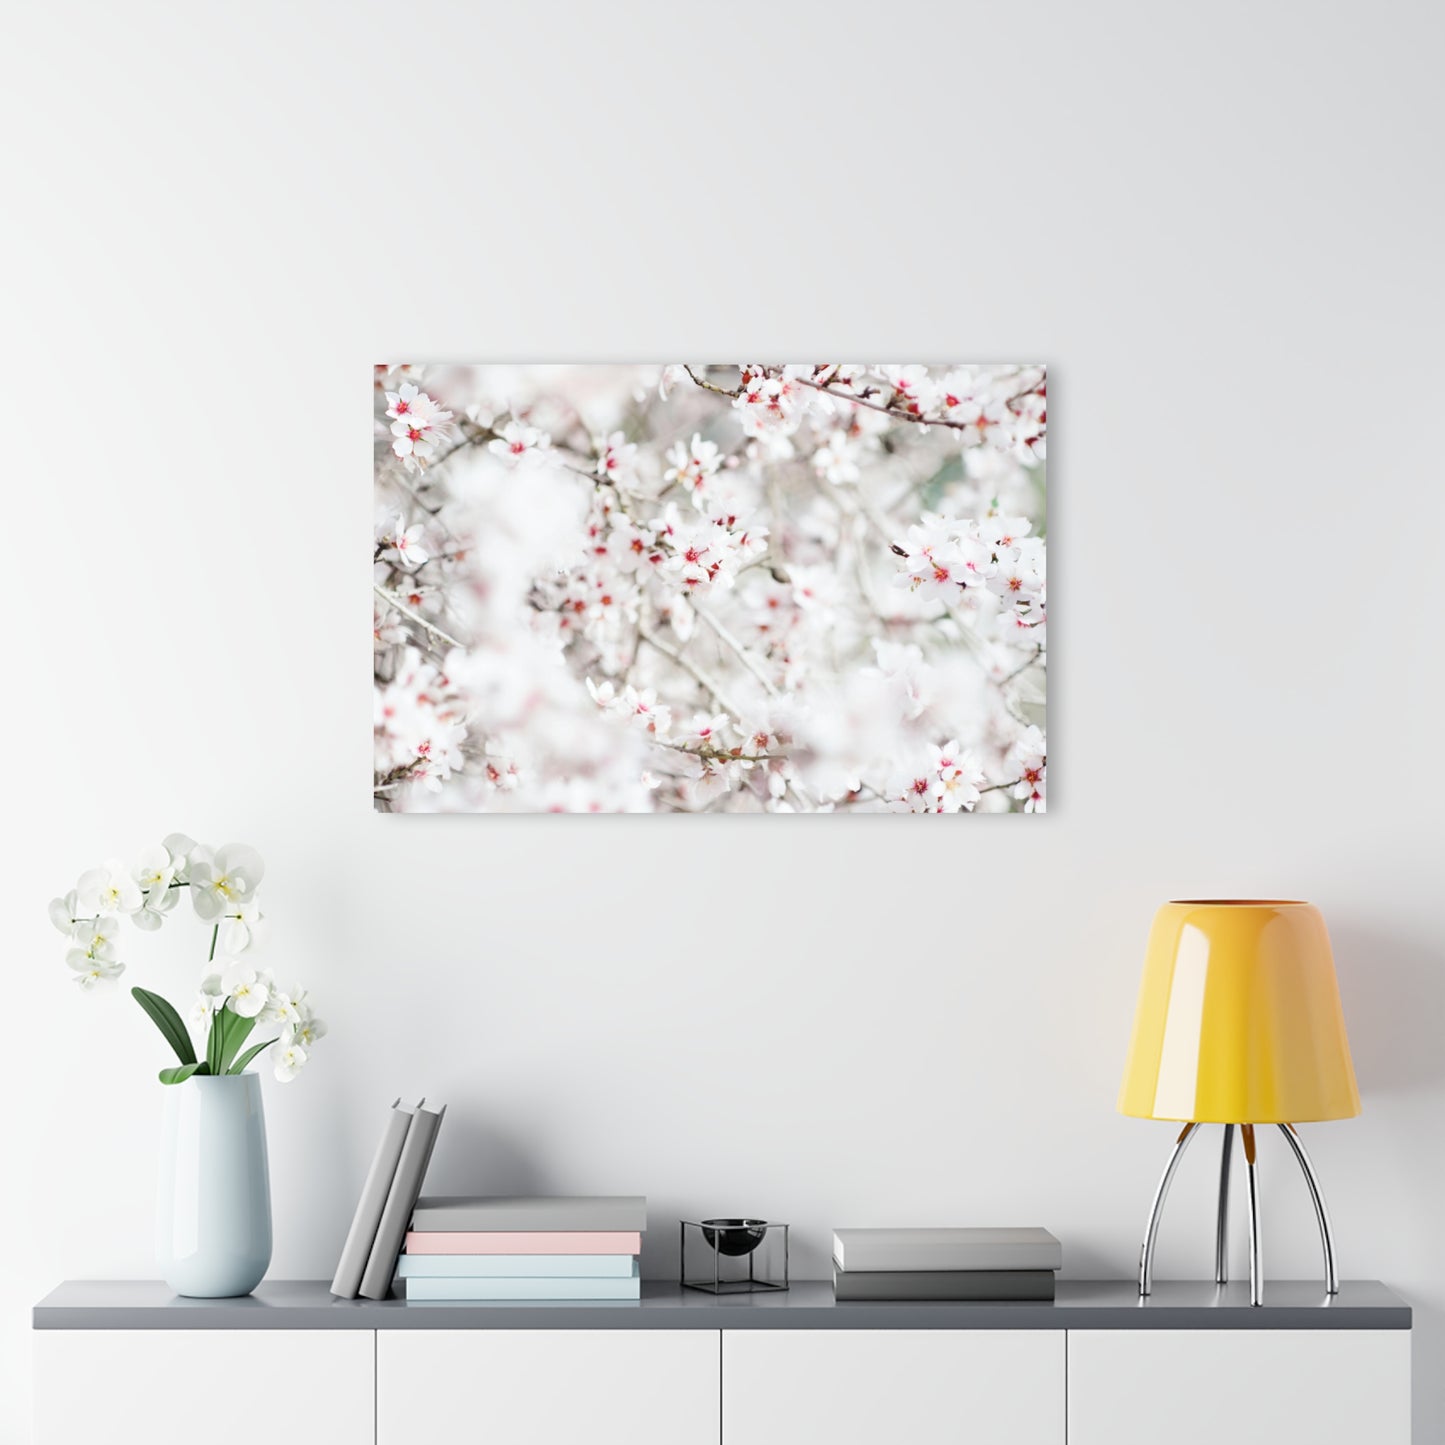 Almond Blossom Joy by Yehoshua Halevi Acrylic Print (French Cleat Hanging)